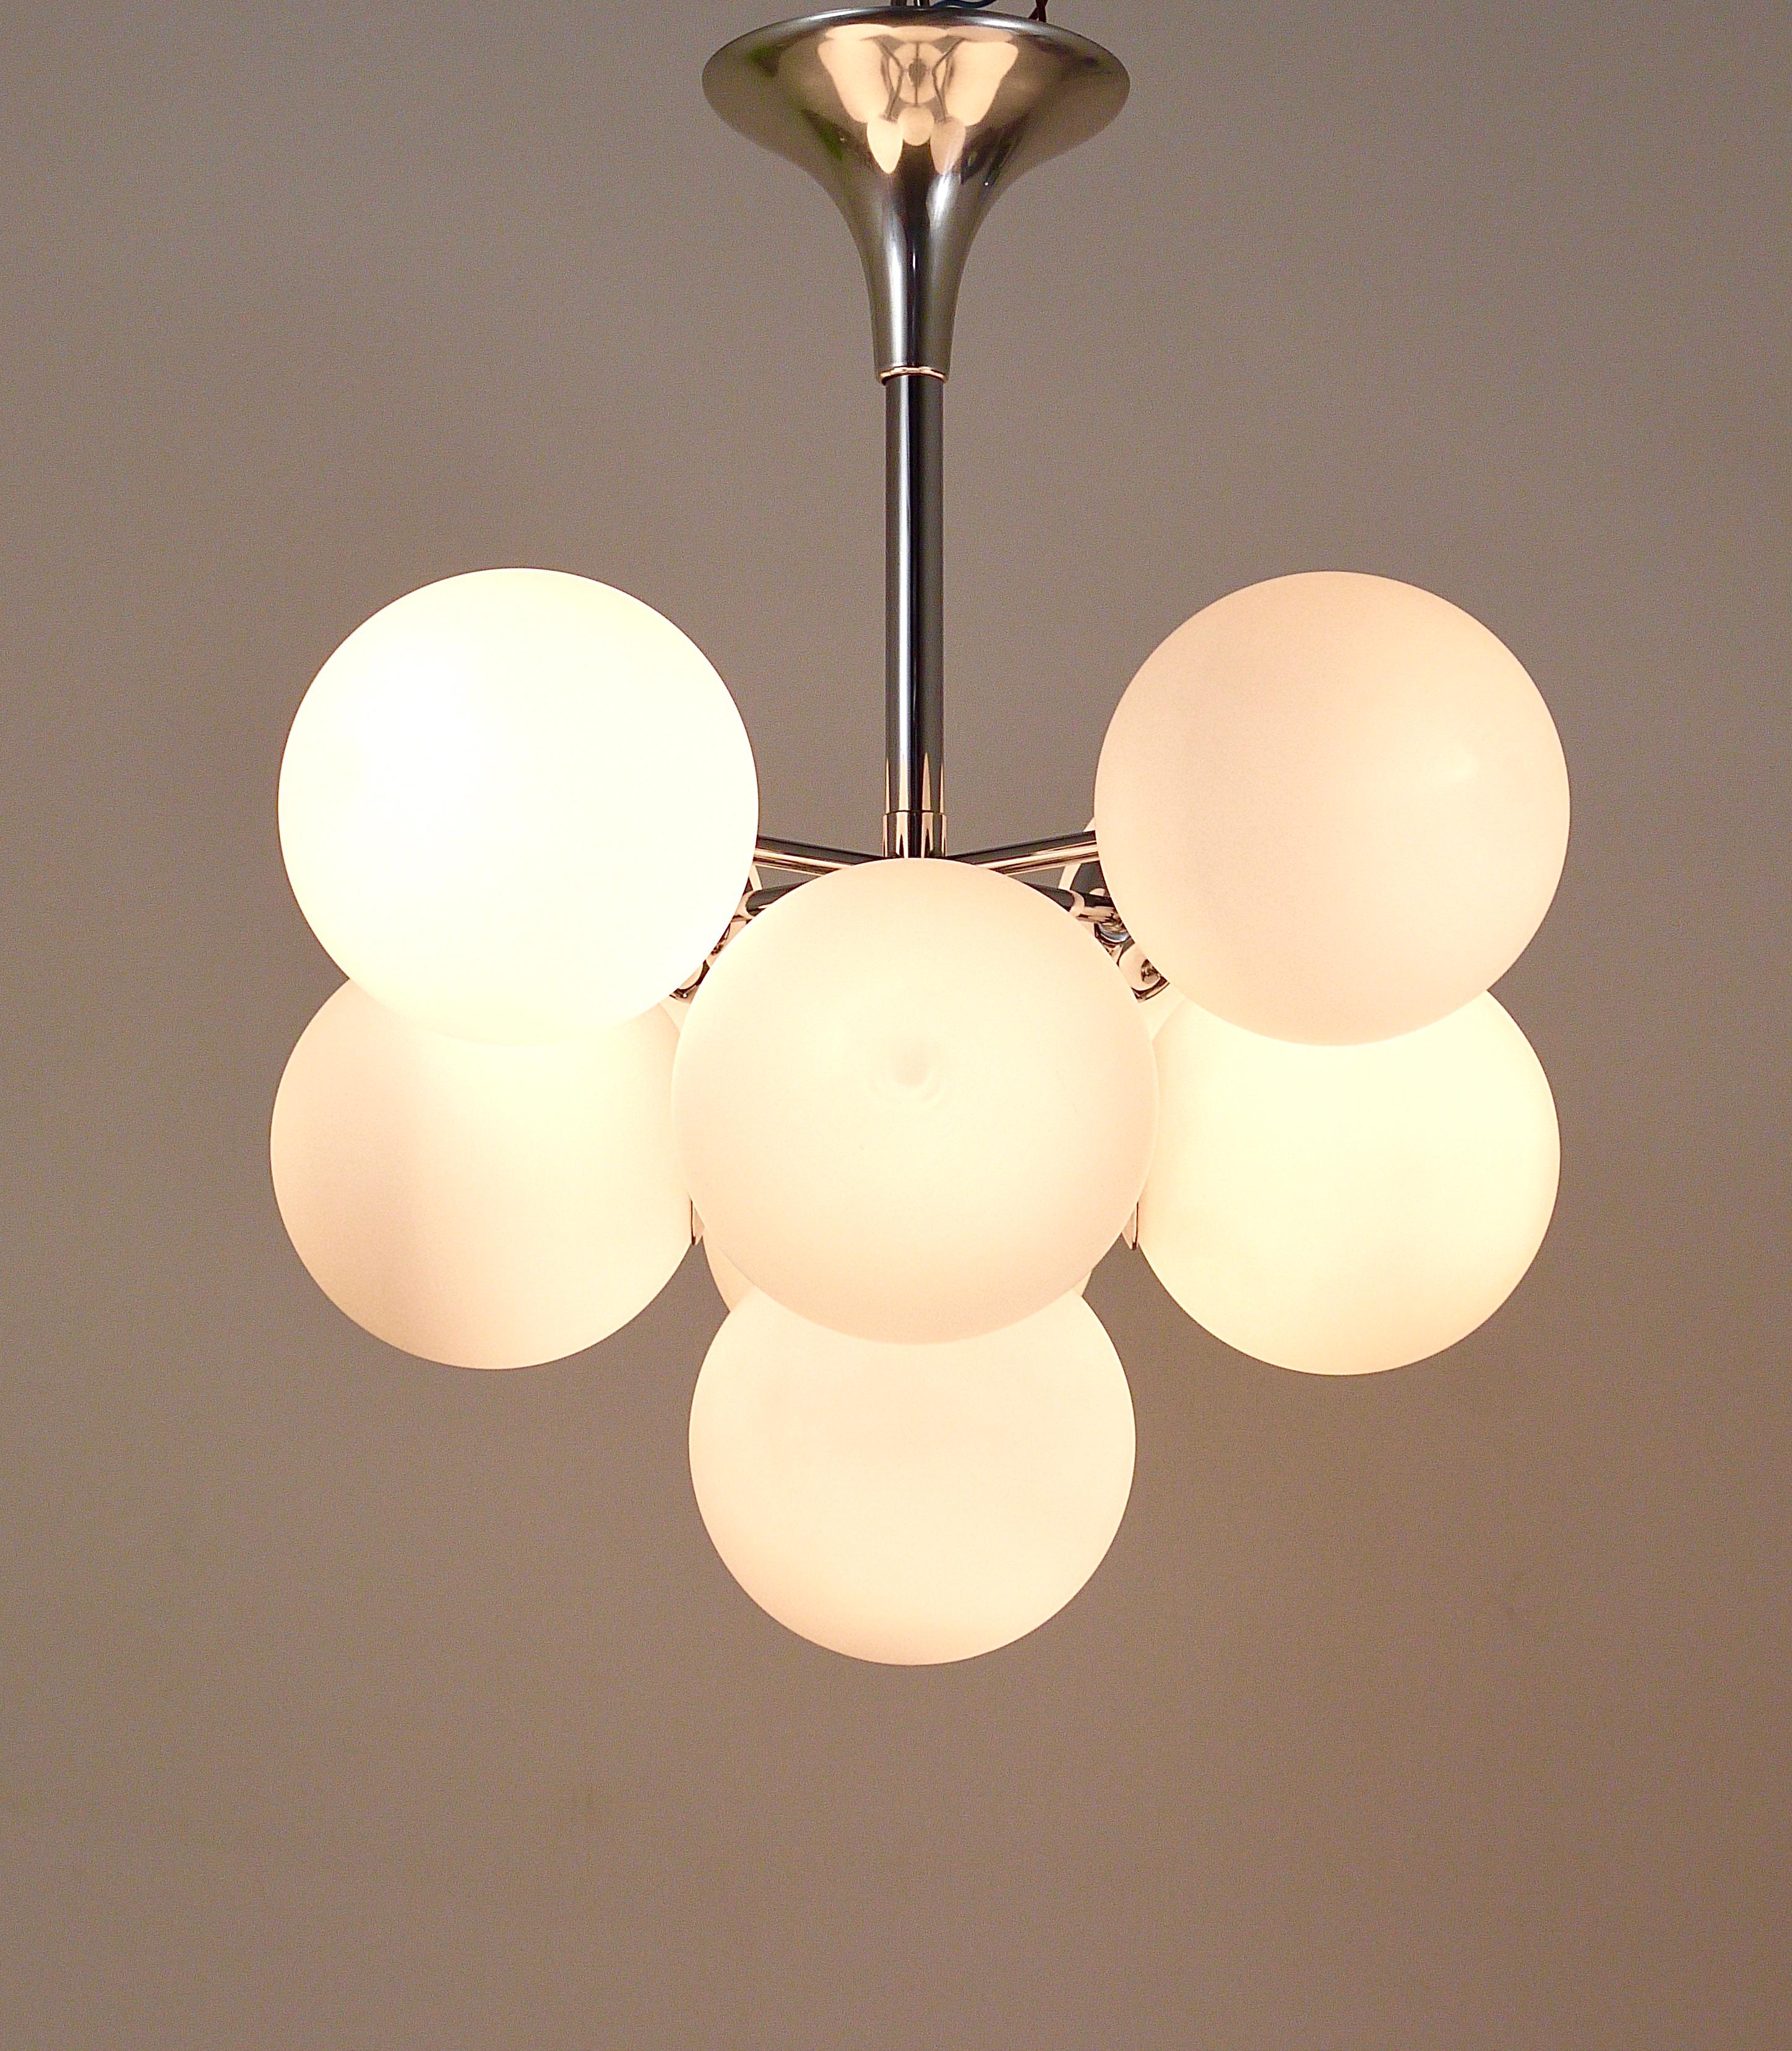 Chromed Atomic Chandelier with White Glass Globes, Temde, Switzerland For Sale 2